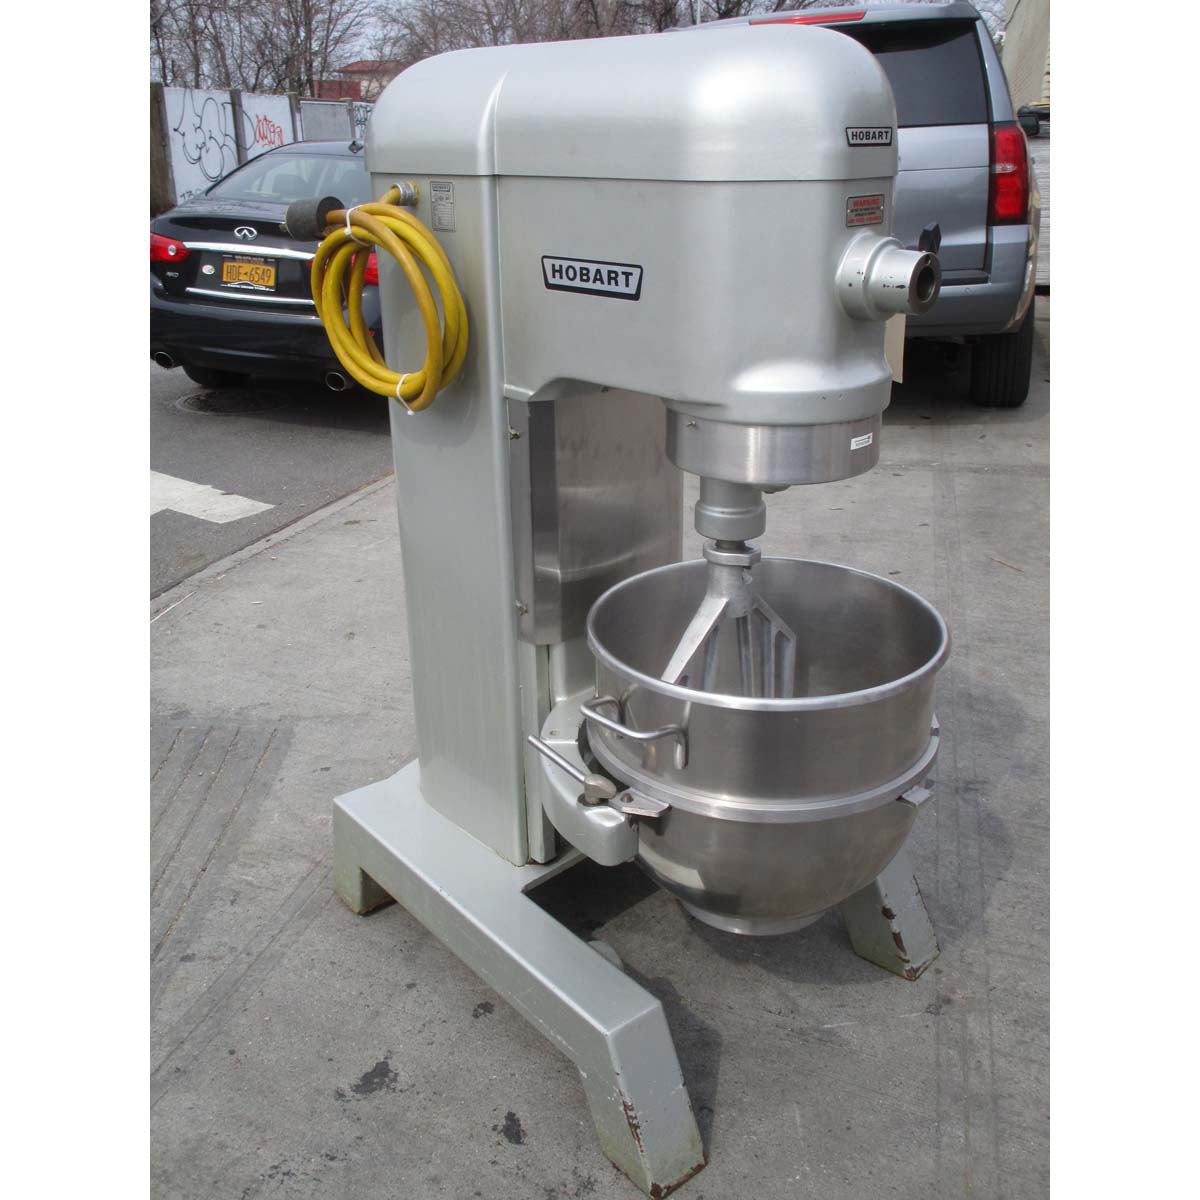 Hobart H600 60 Quart Mixer 'With Power Bowl Lift,' Used Excellent Condition image 3